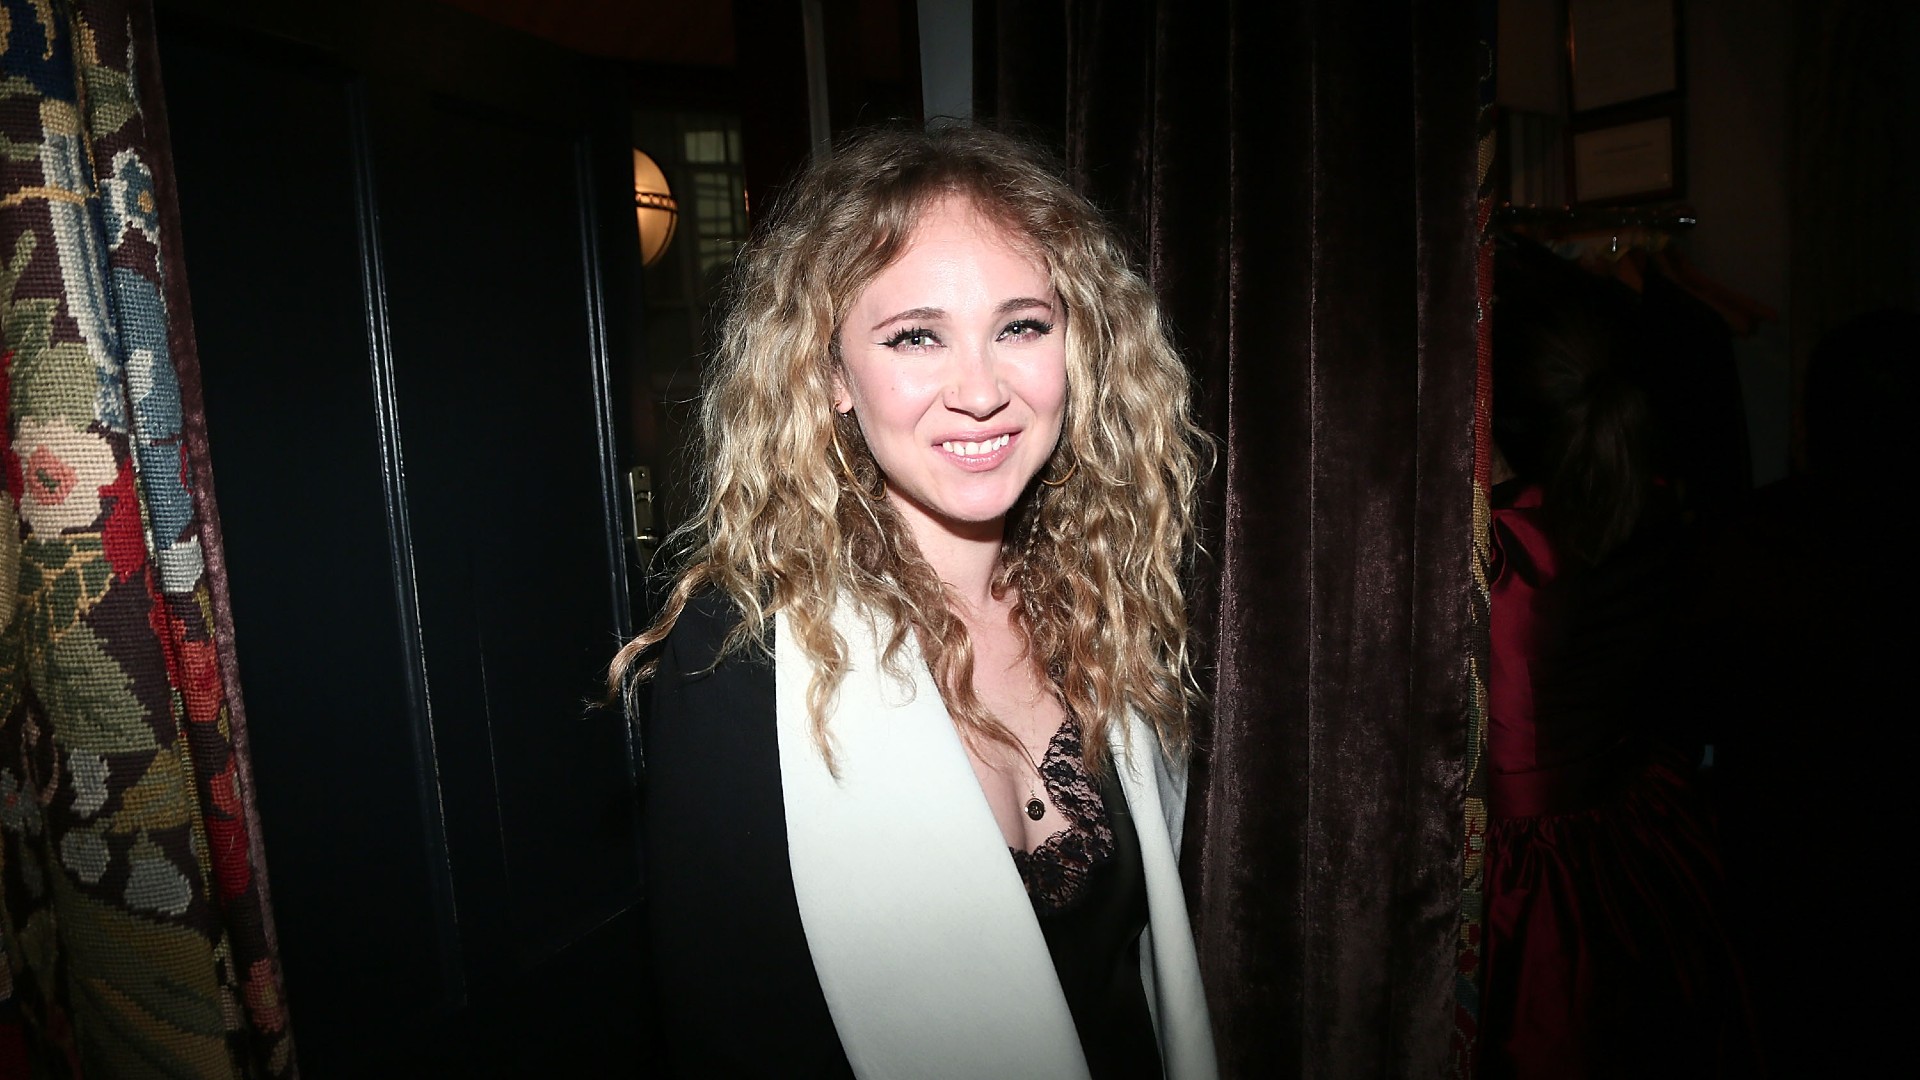 10 Things to Know About 'Ted Lasso' Actress Juno Temple